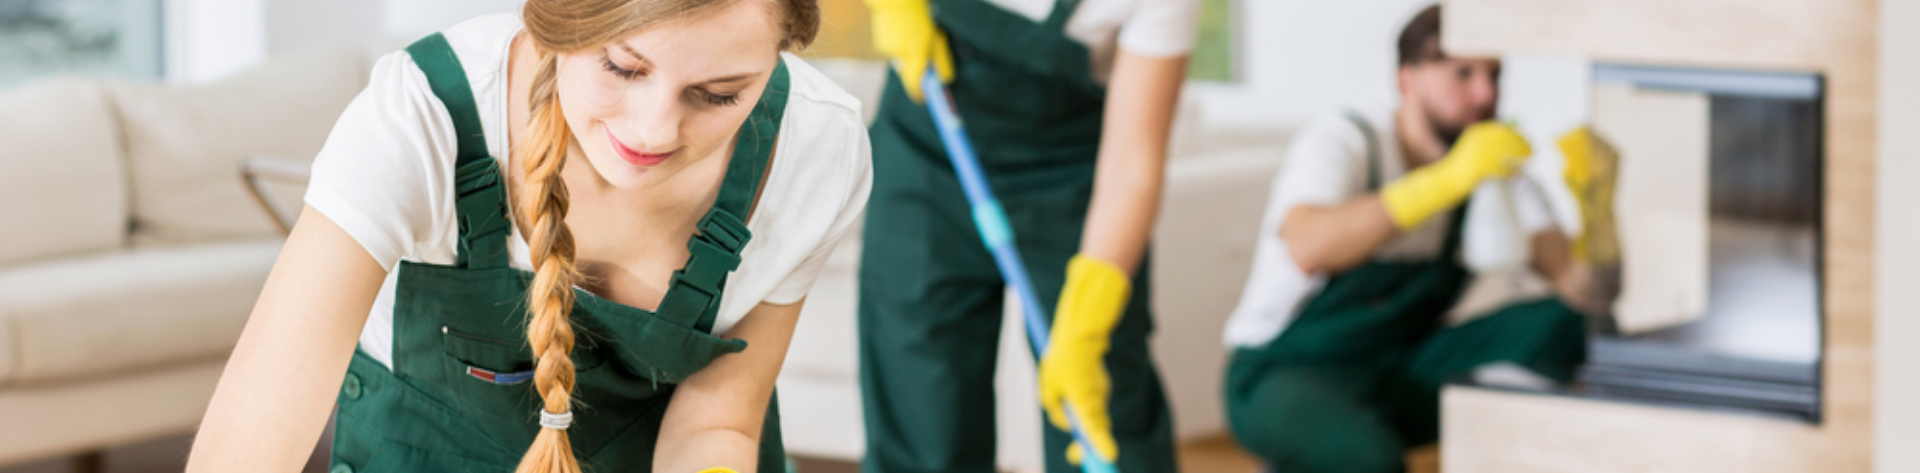 Five Questions to Consider Before Hiring a House Cleaner